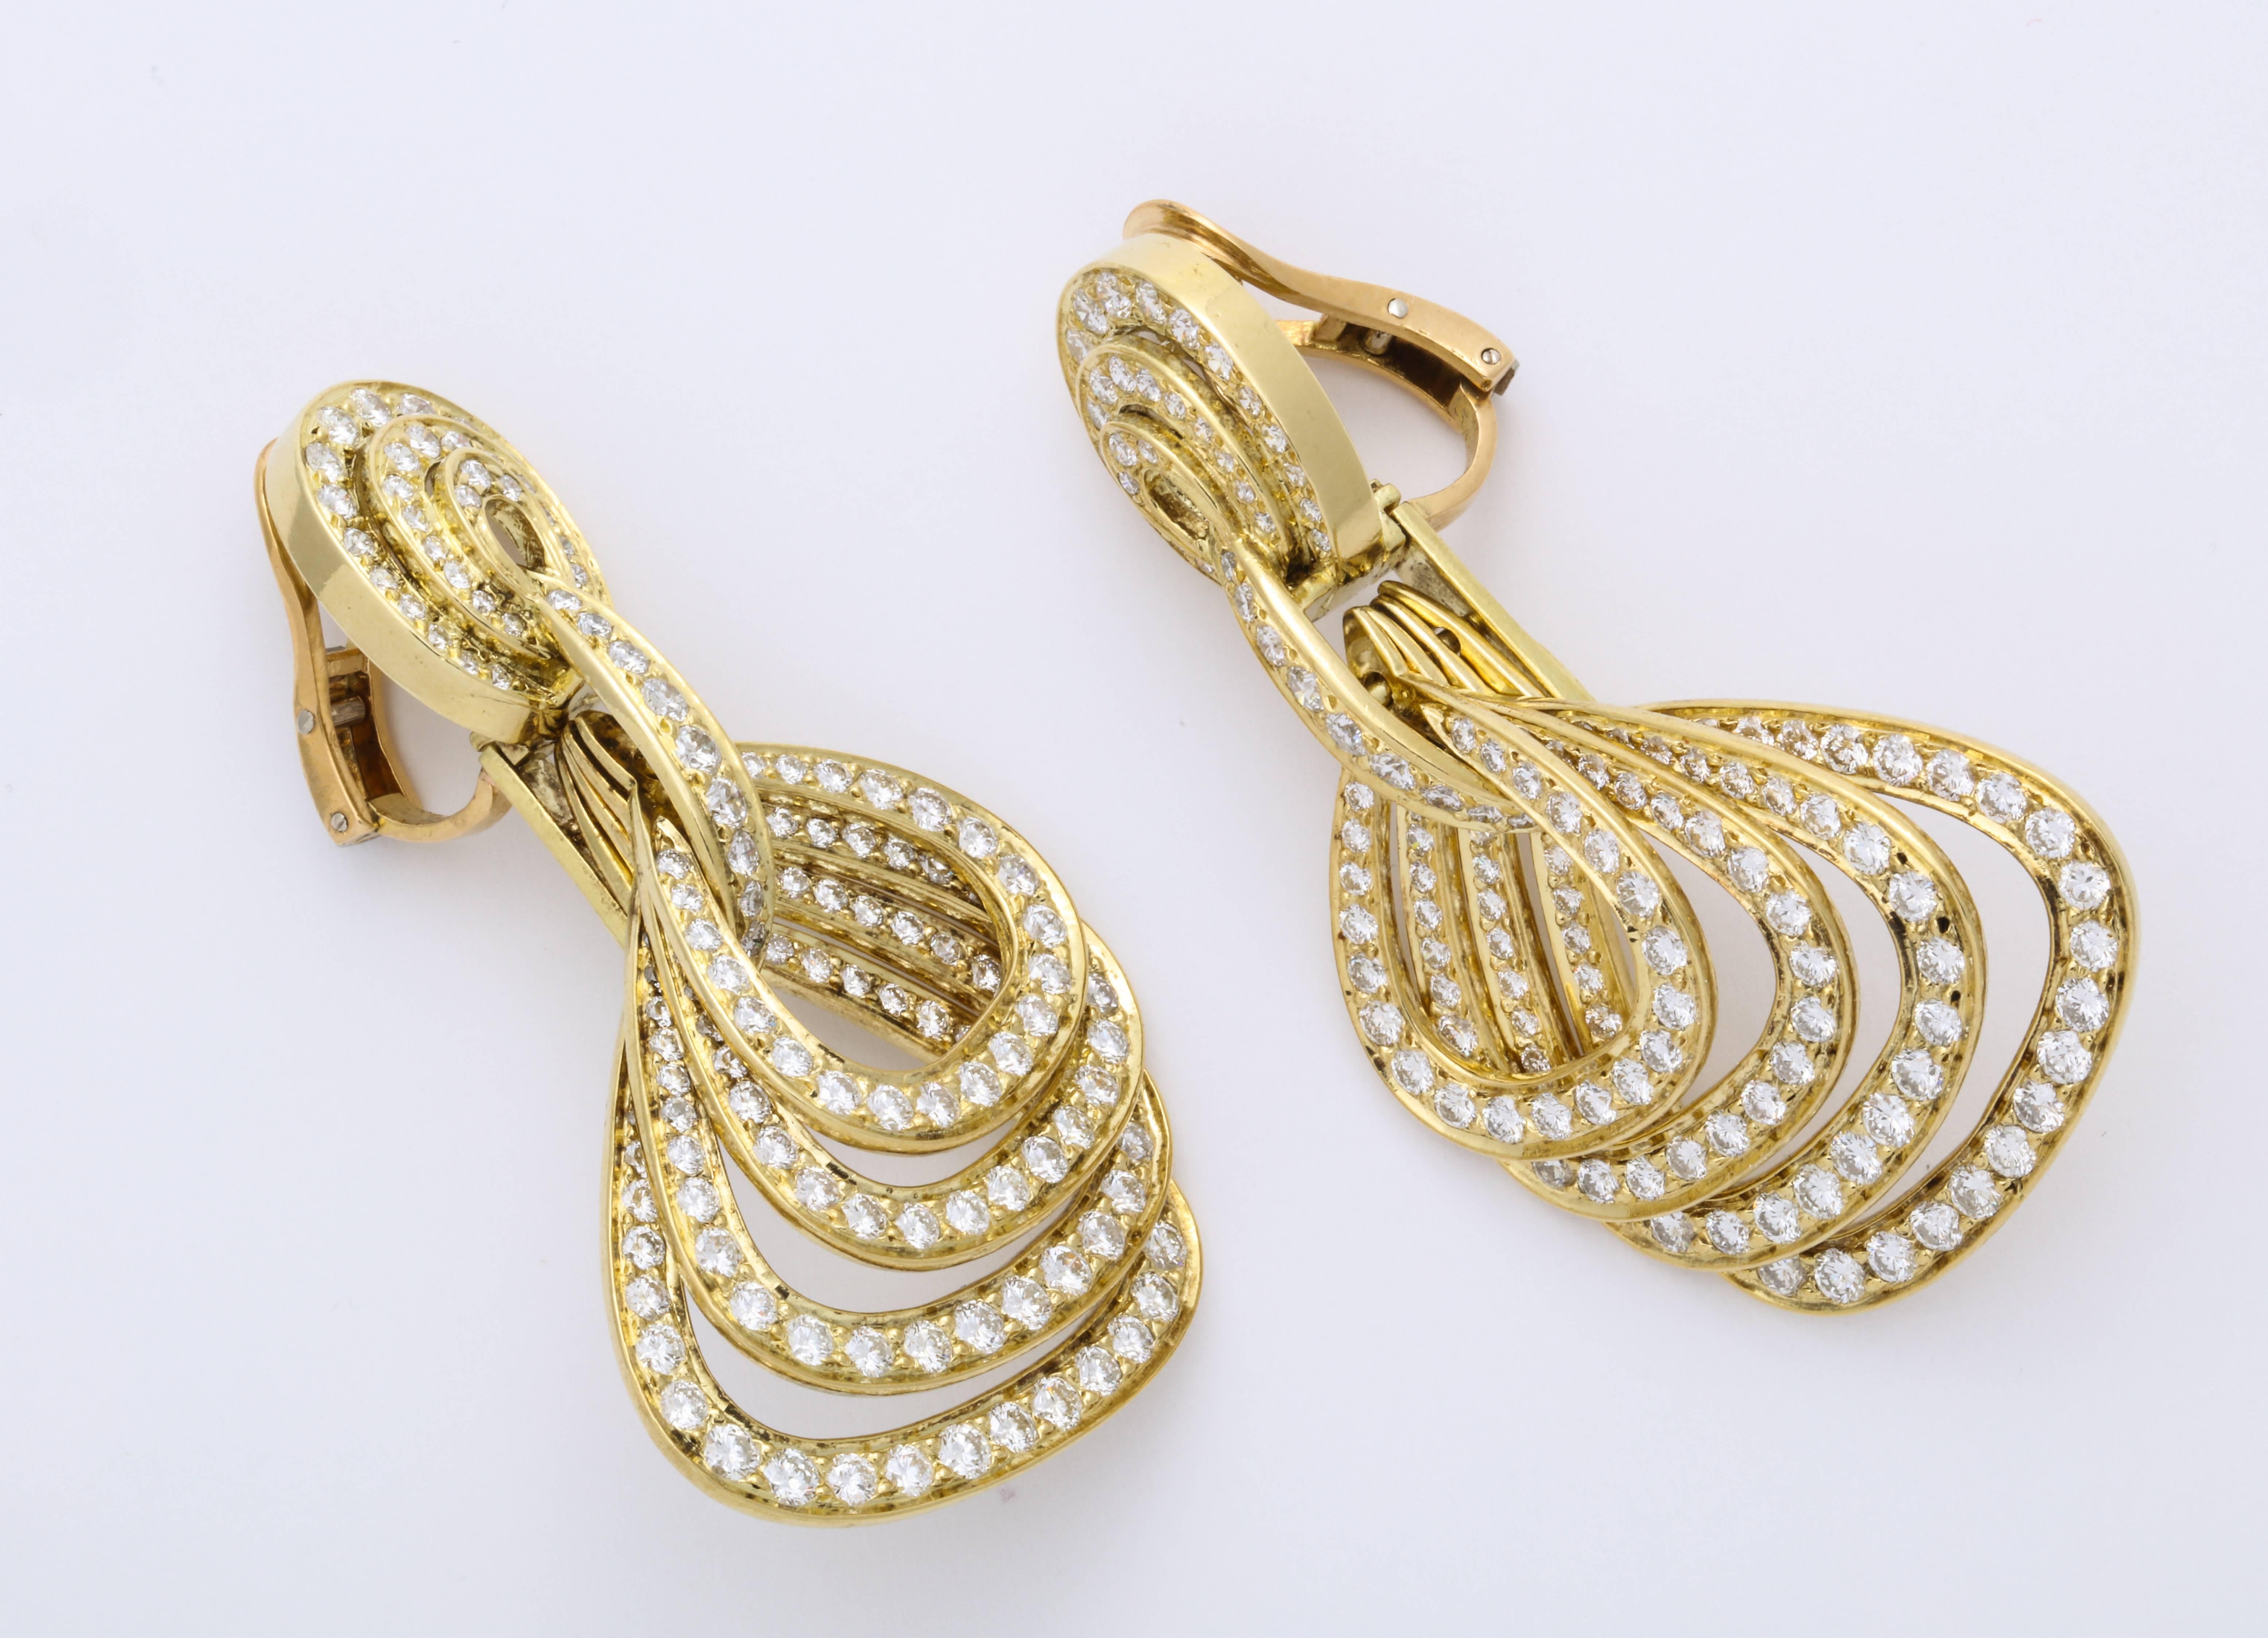 Graduating quadruple lozenge-shape articulating cutouts suspended from oval earrings decorated with colorless round brilliant-cut diamonds weighing 11.86 carats mounted on 18K yellow gold.
